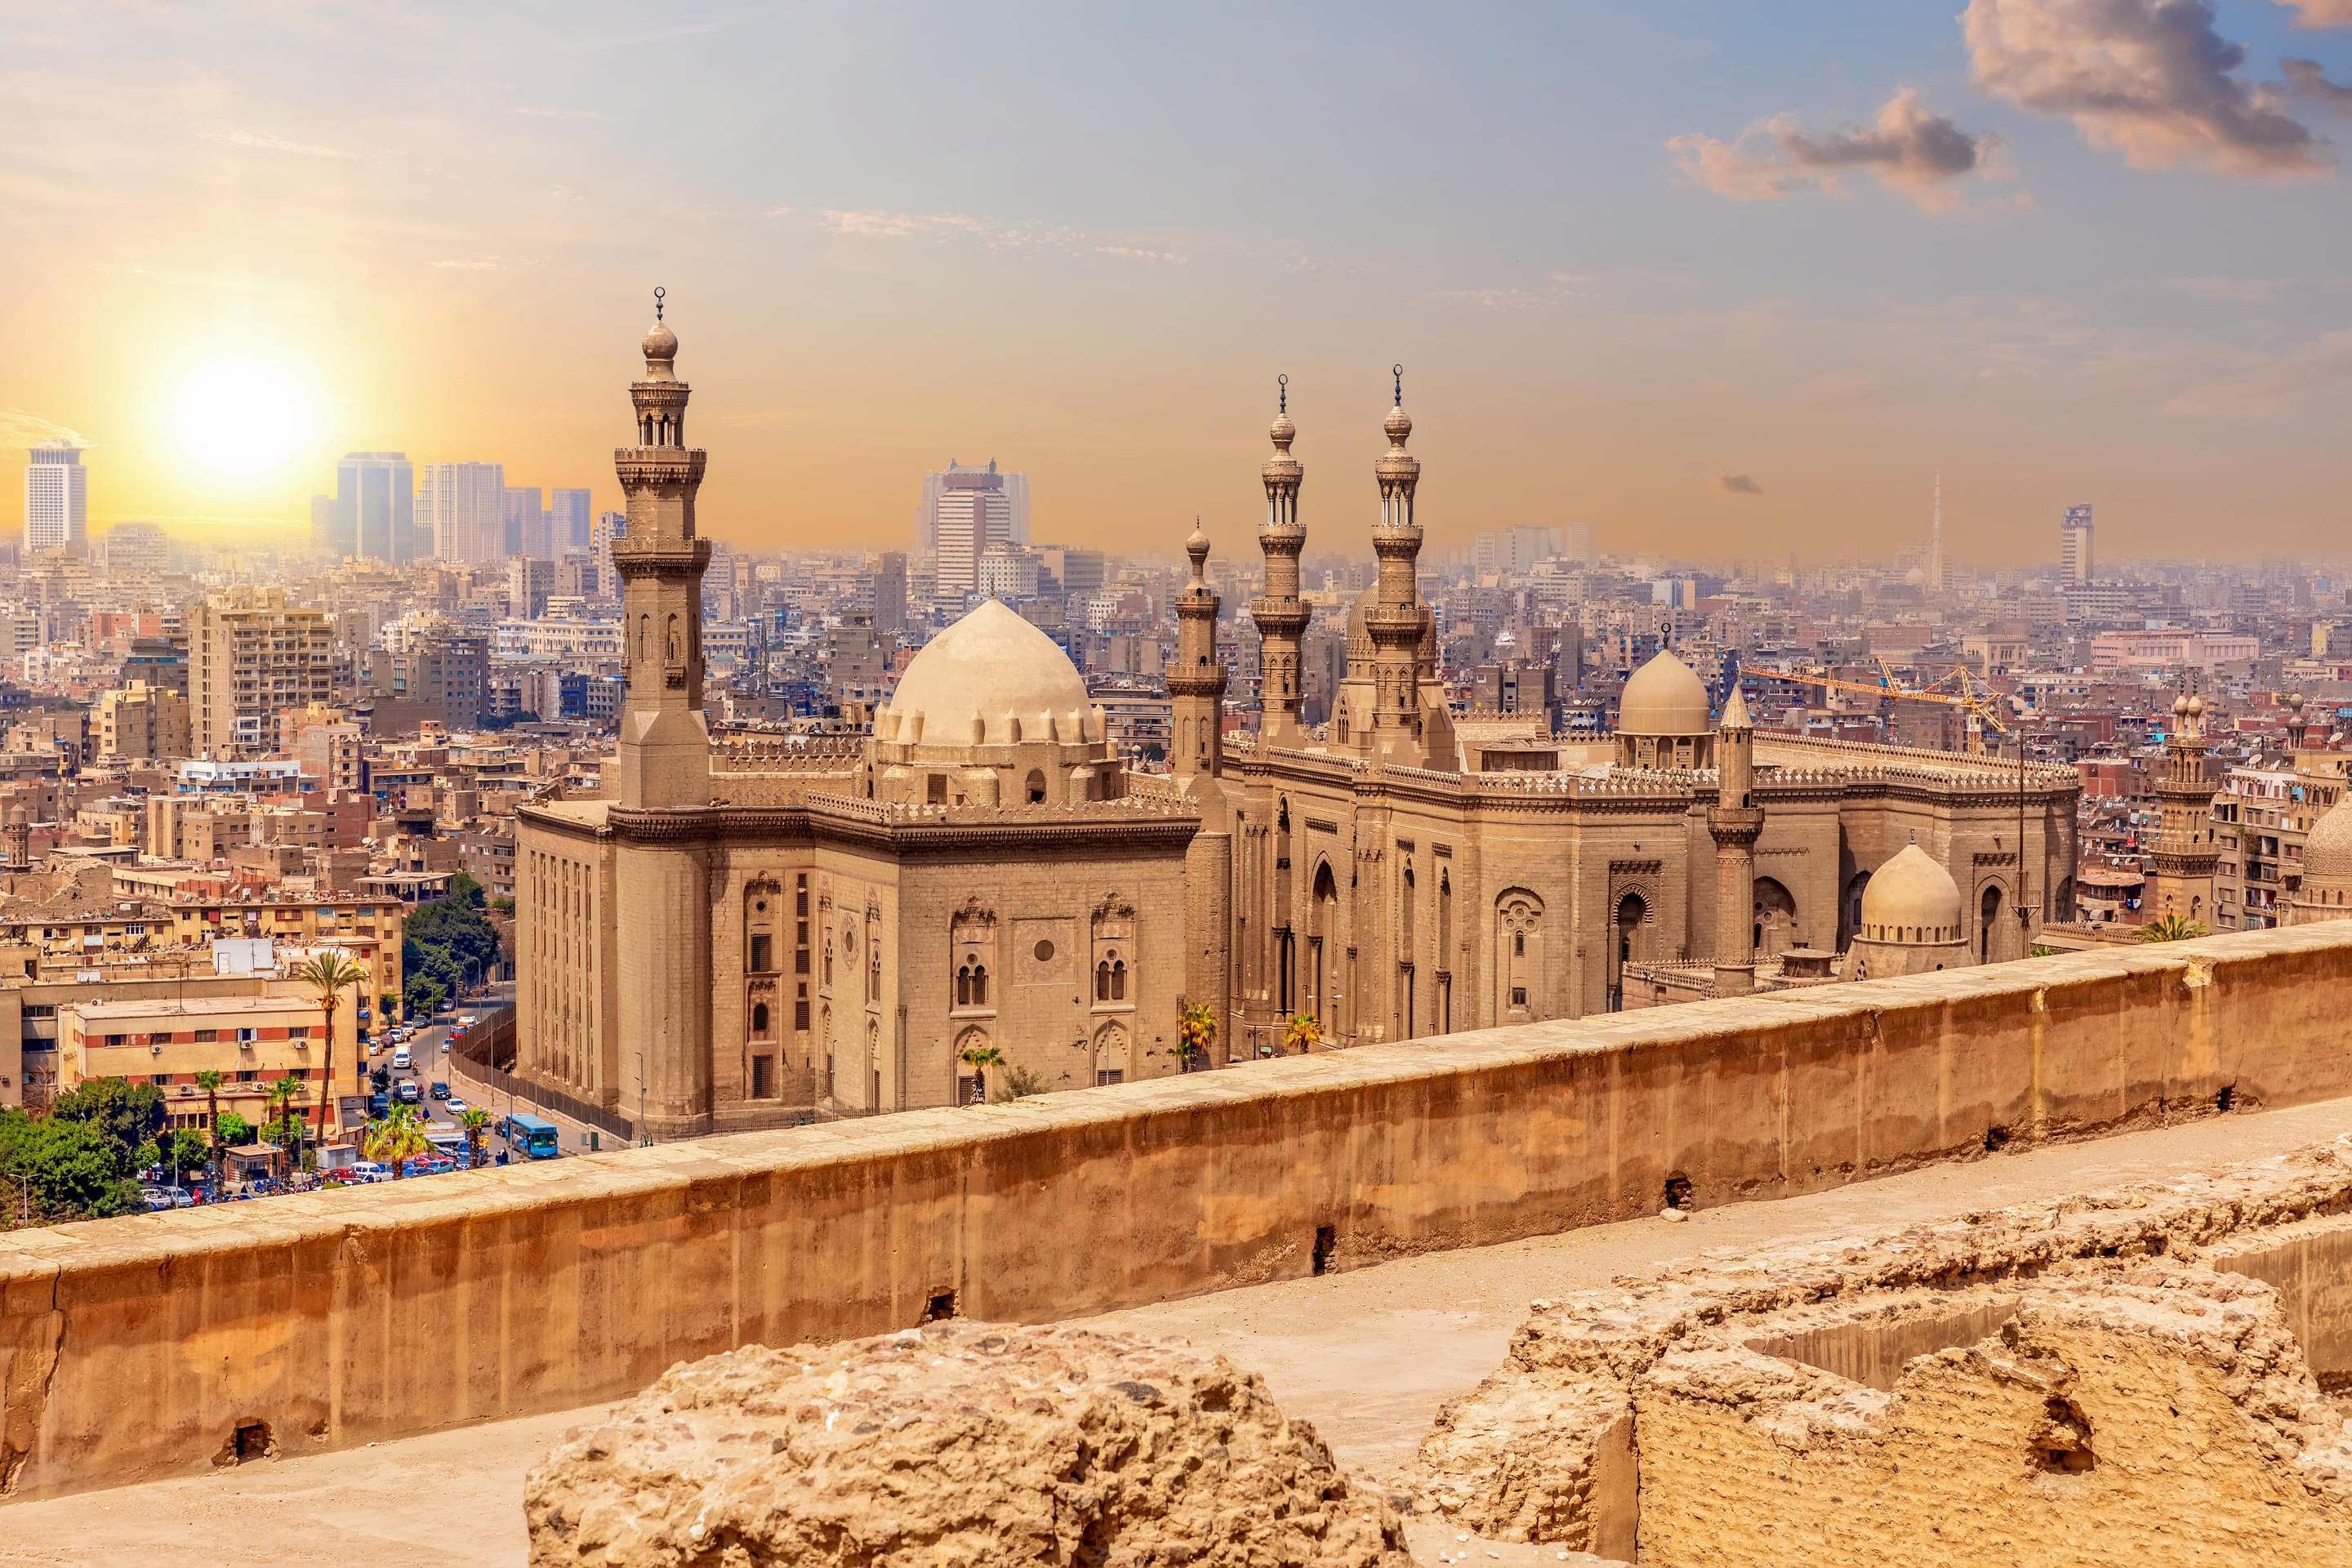 Old Cairo Overview